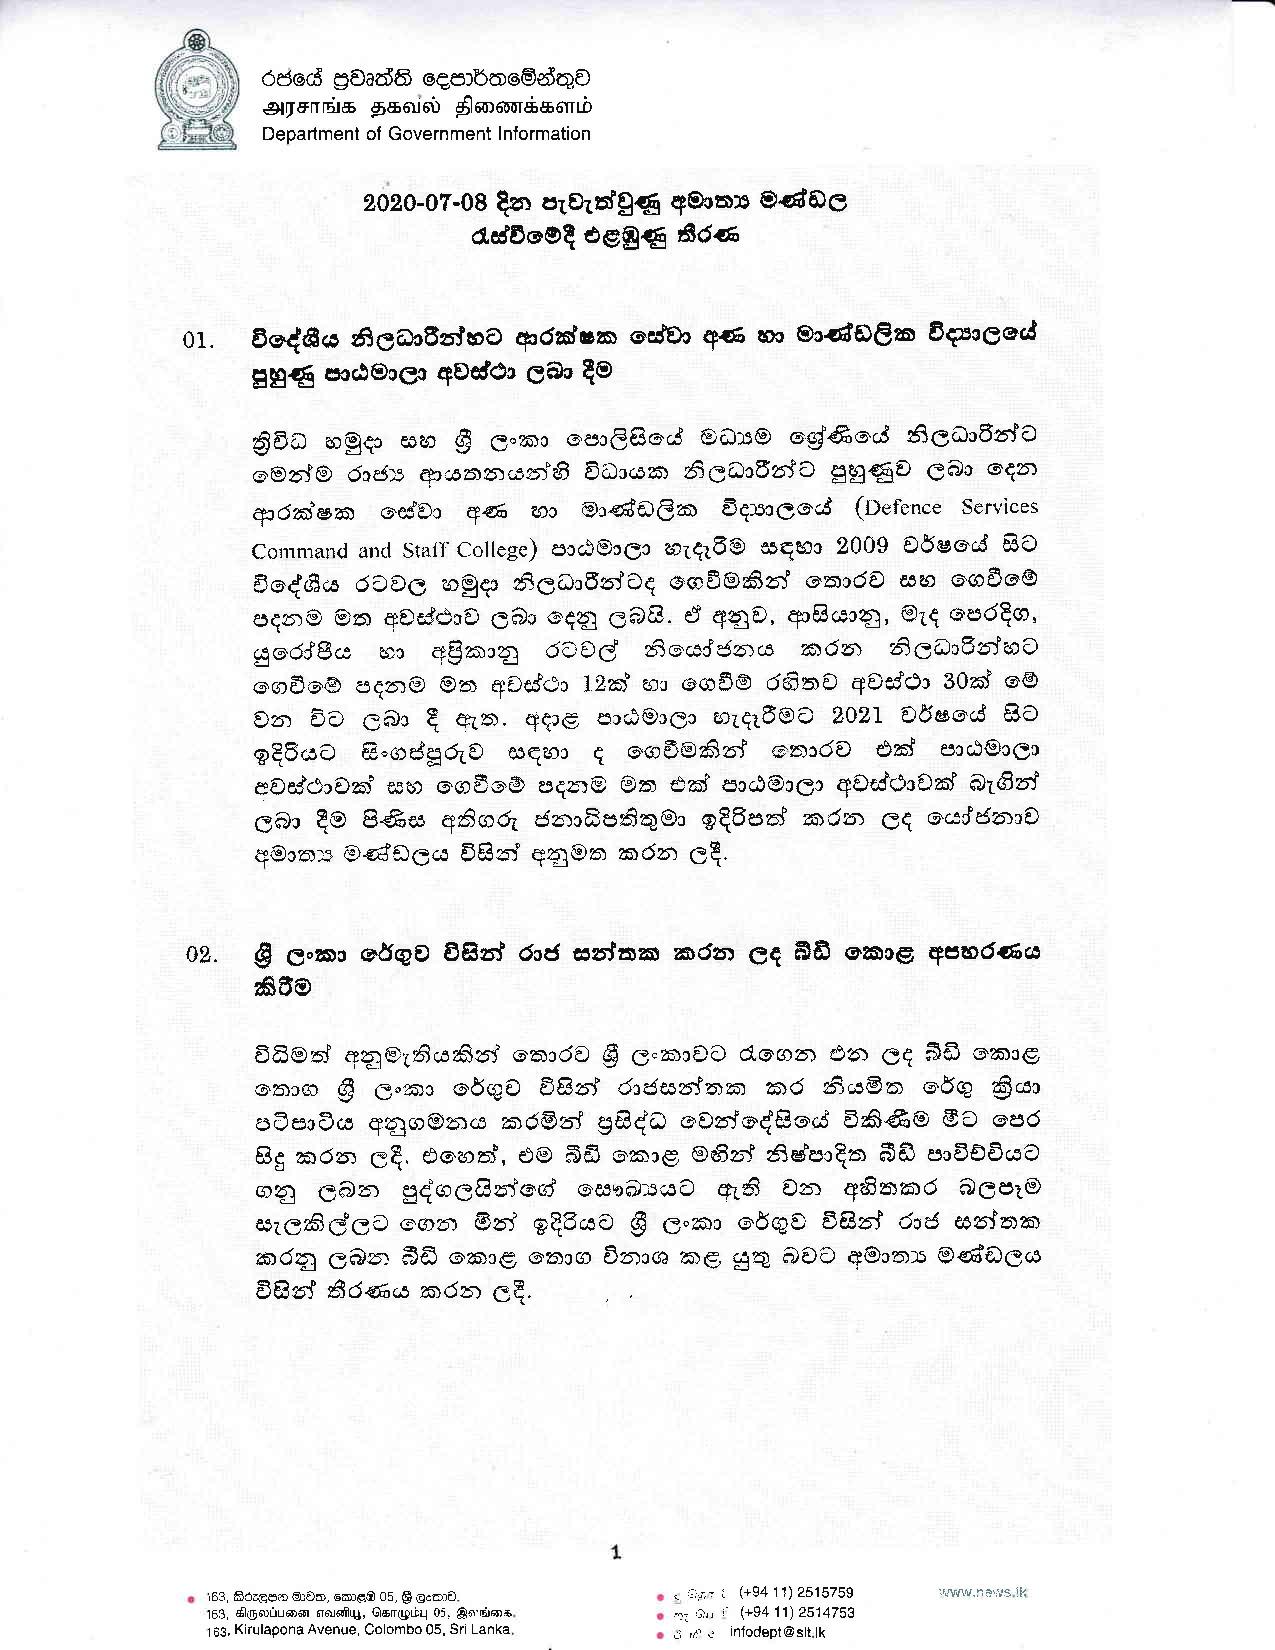 Cabinet Decision on 08.07.2020S page 001